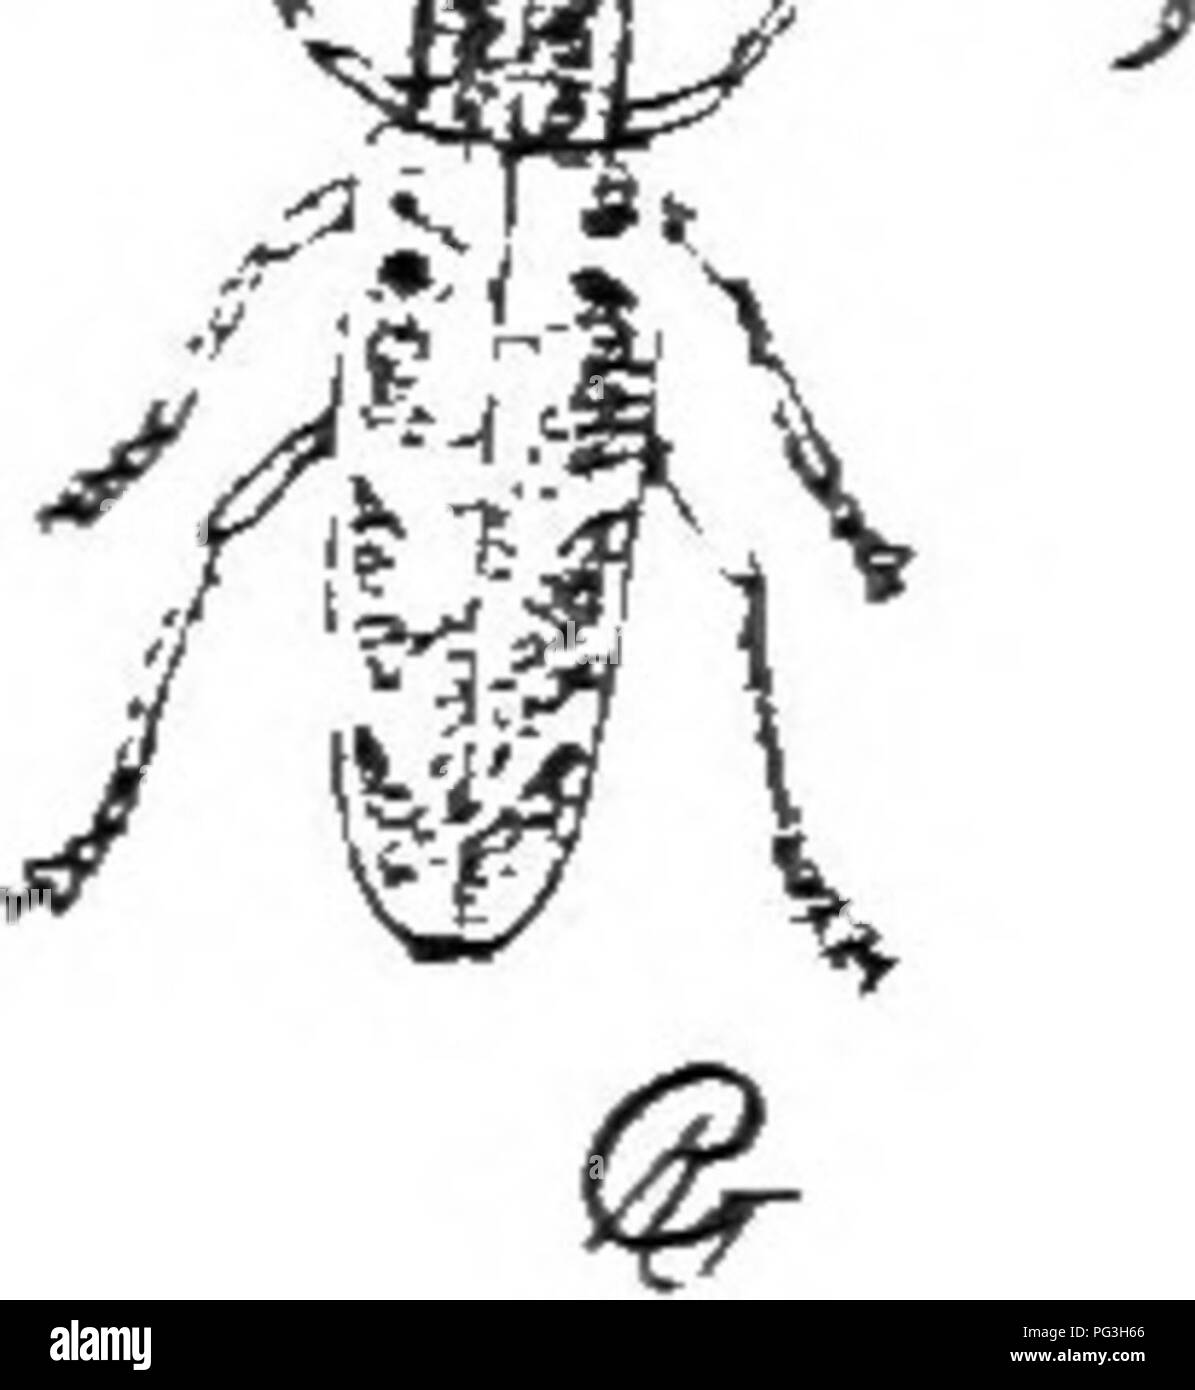 . An illustrated descriptive catalogue of the coleoptera or beetles (exclusive of the Rhynchophora) known to occur in Indiana : with bibliography and descriptions of new species . Beetles. TUB iAi.NG-IlOKNKD WUOD-BORIXG BEETLES. IHST the borers, -svith possible recourse to the use of repellant washes, is about all that can be done and in the majority of instances should afford considerable protection. In one specimen from Porter County the tips of elytra are acute and divaricate. S. Candida Fab. (Fifr. 470), length 15-20 mm., has the same range as mocsia. Its larva is known as the &quot;apple  Stock Photo